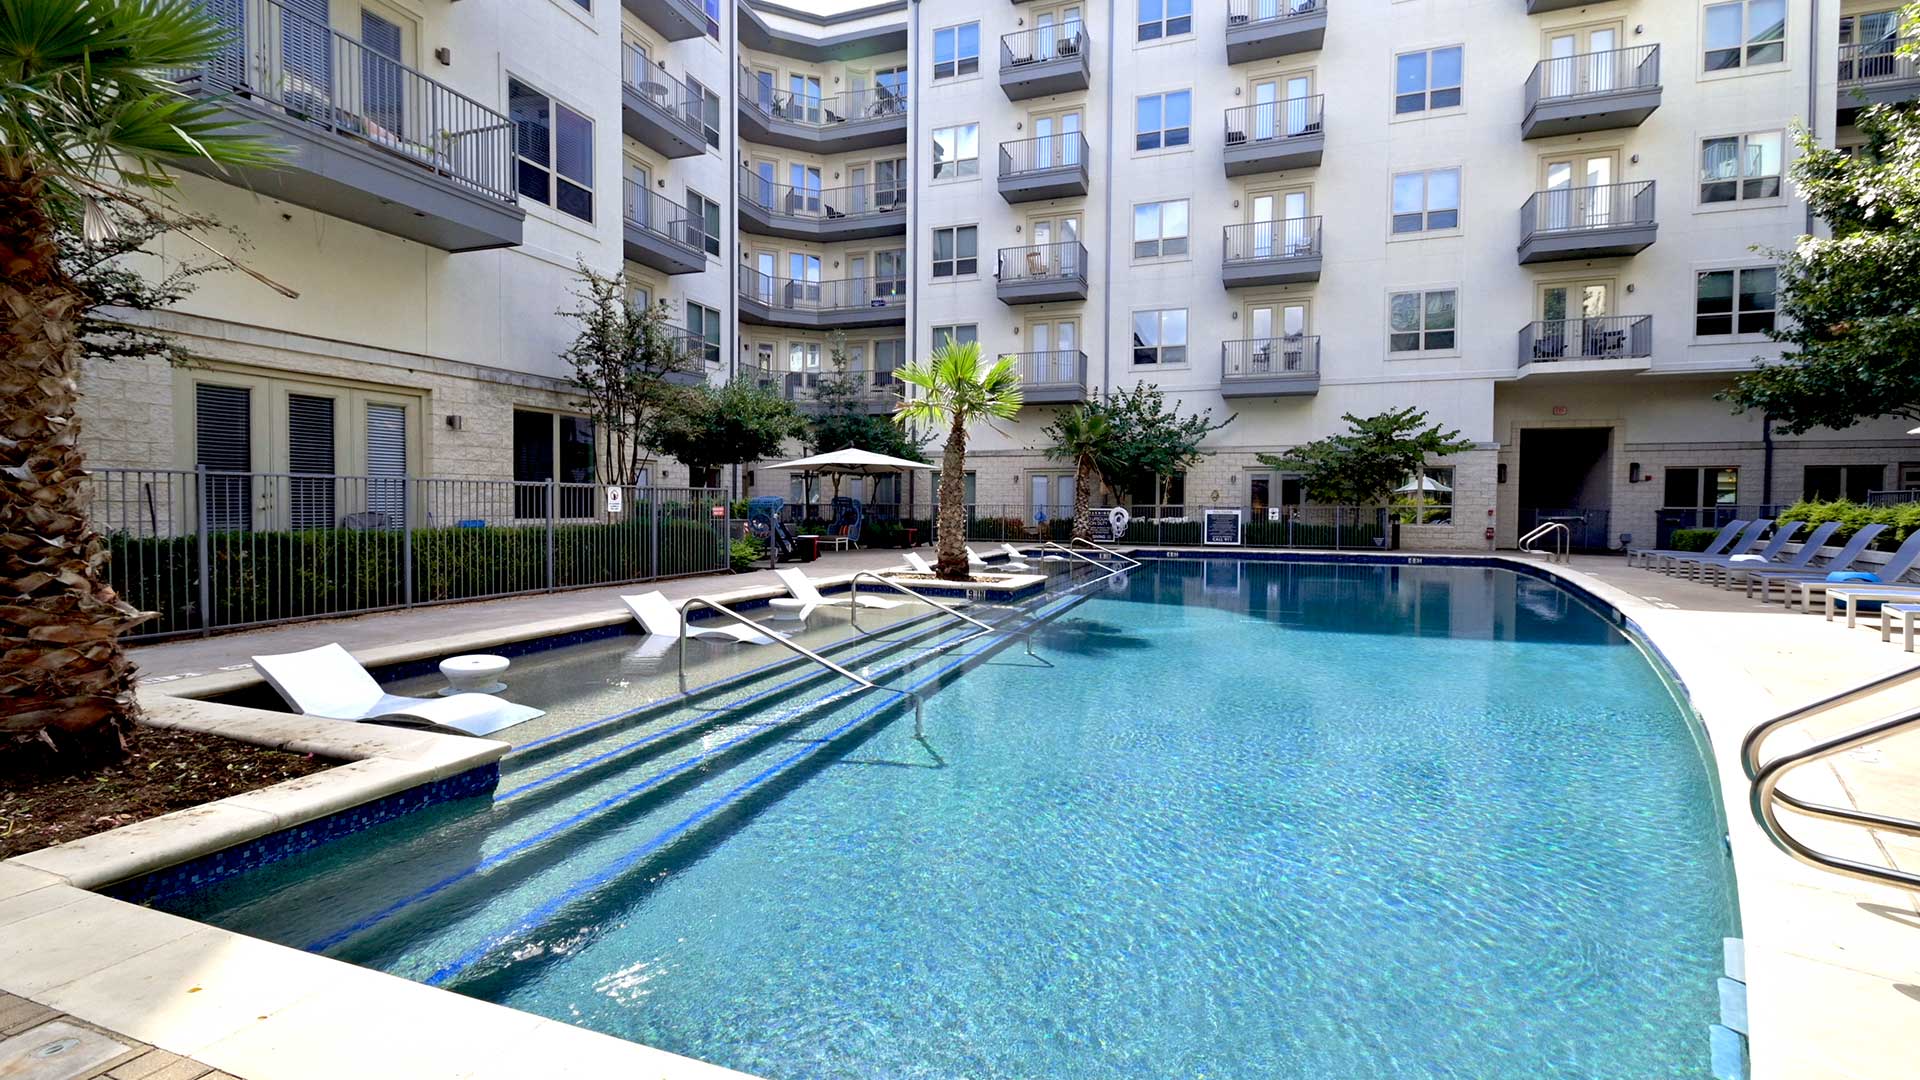 Looking down the outdoor pool with the apartment building at the far end. The tanning shelf runs along the left with a palm tree in the middle.